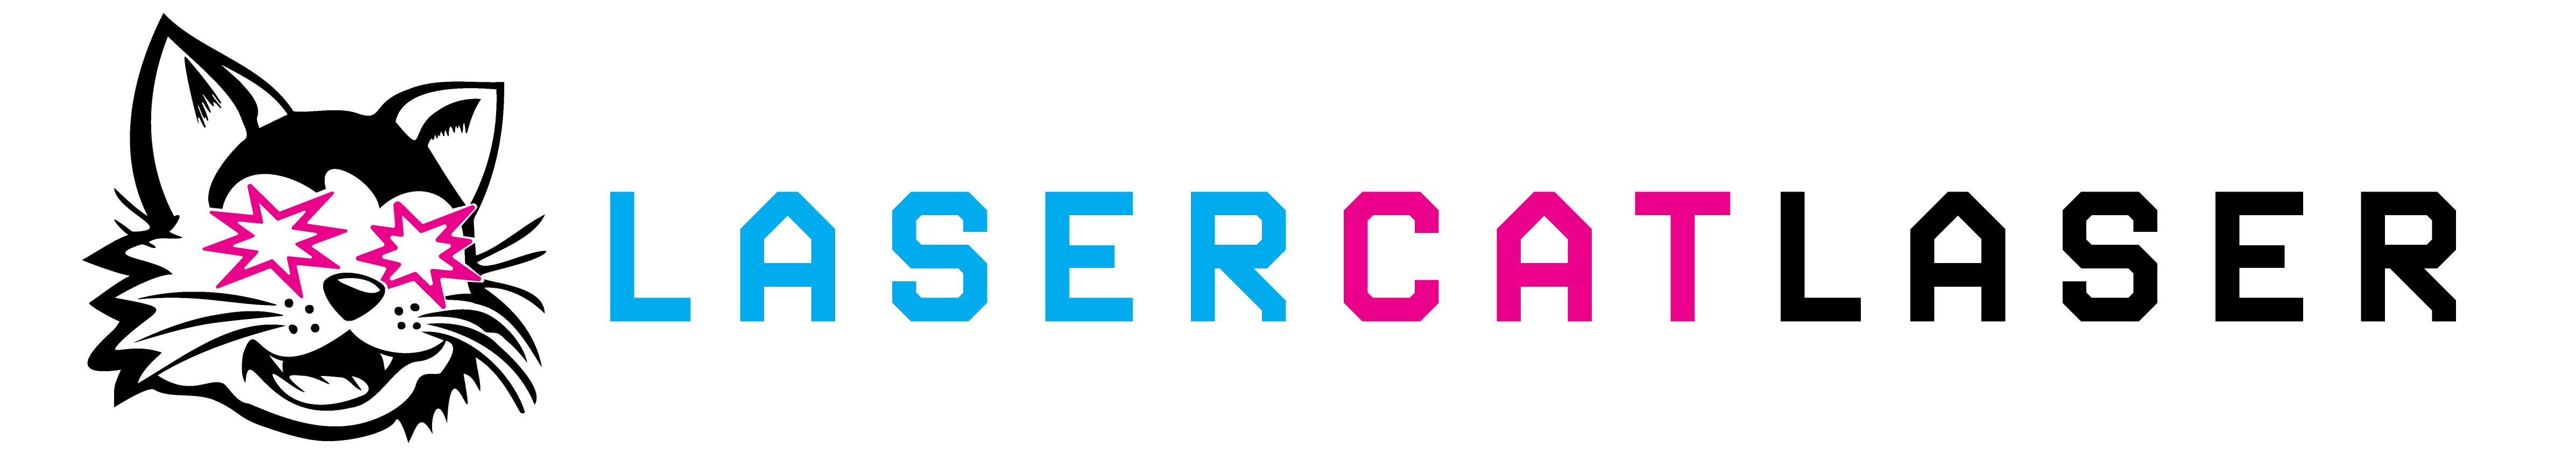 LaserCatLaser written in magenta, cyan and black letters next to an icon of cat with laser eyes